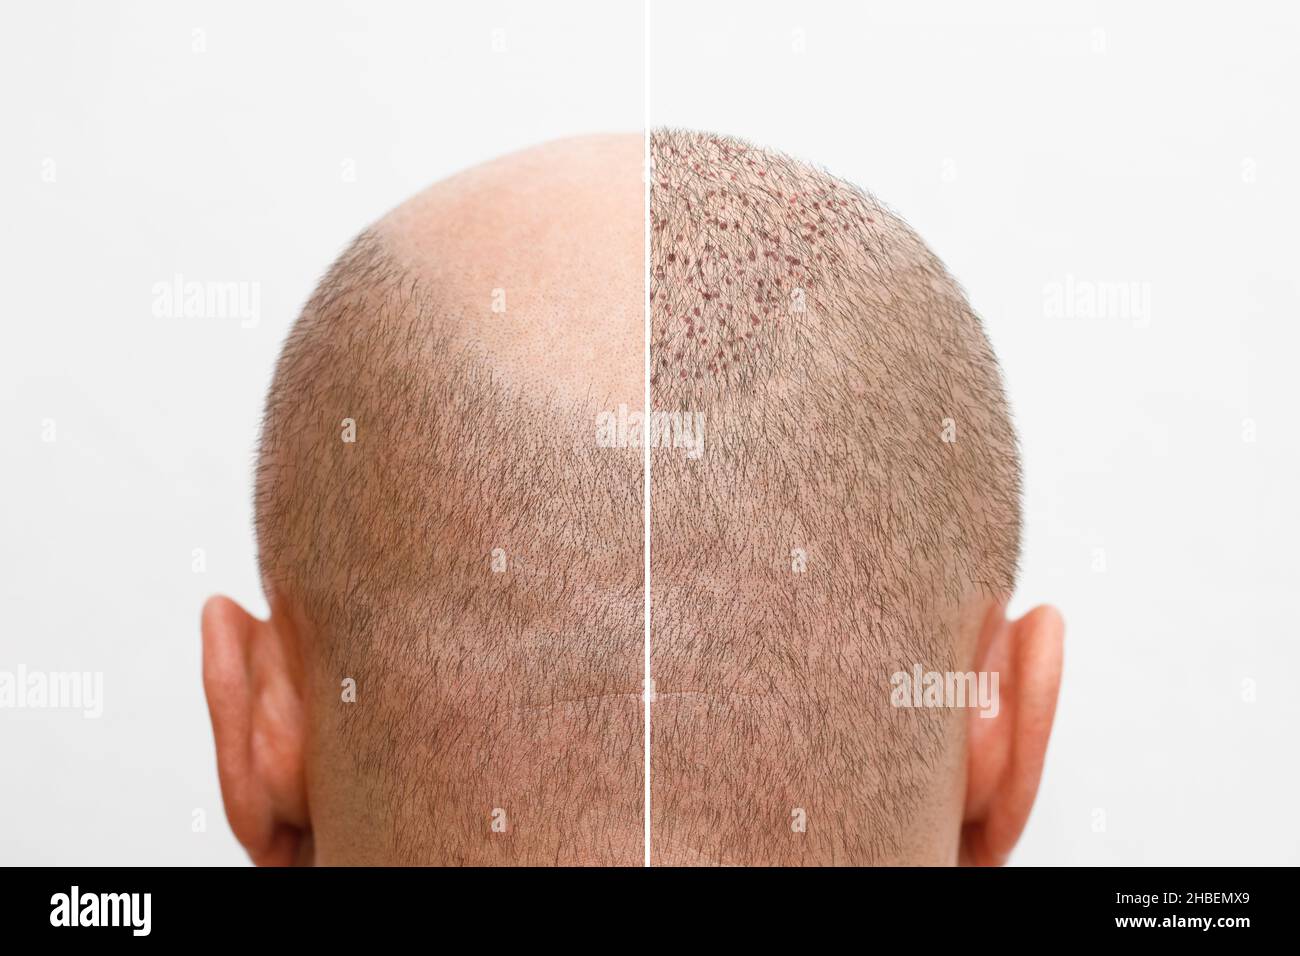 The head of a balding man before and after hair transplant surgery. A man losing his hair has become shaggy. An advertising poster for a hair Stock Photo